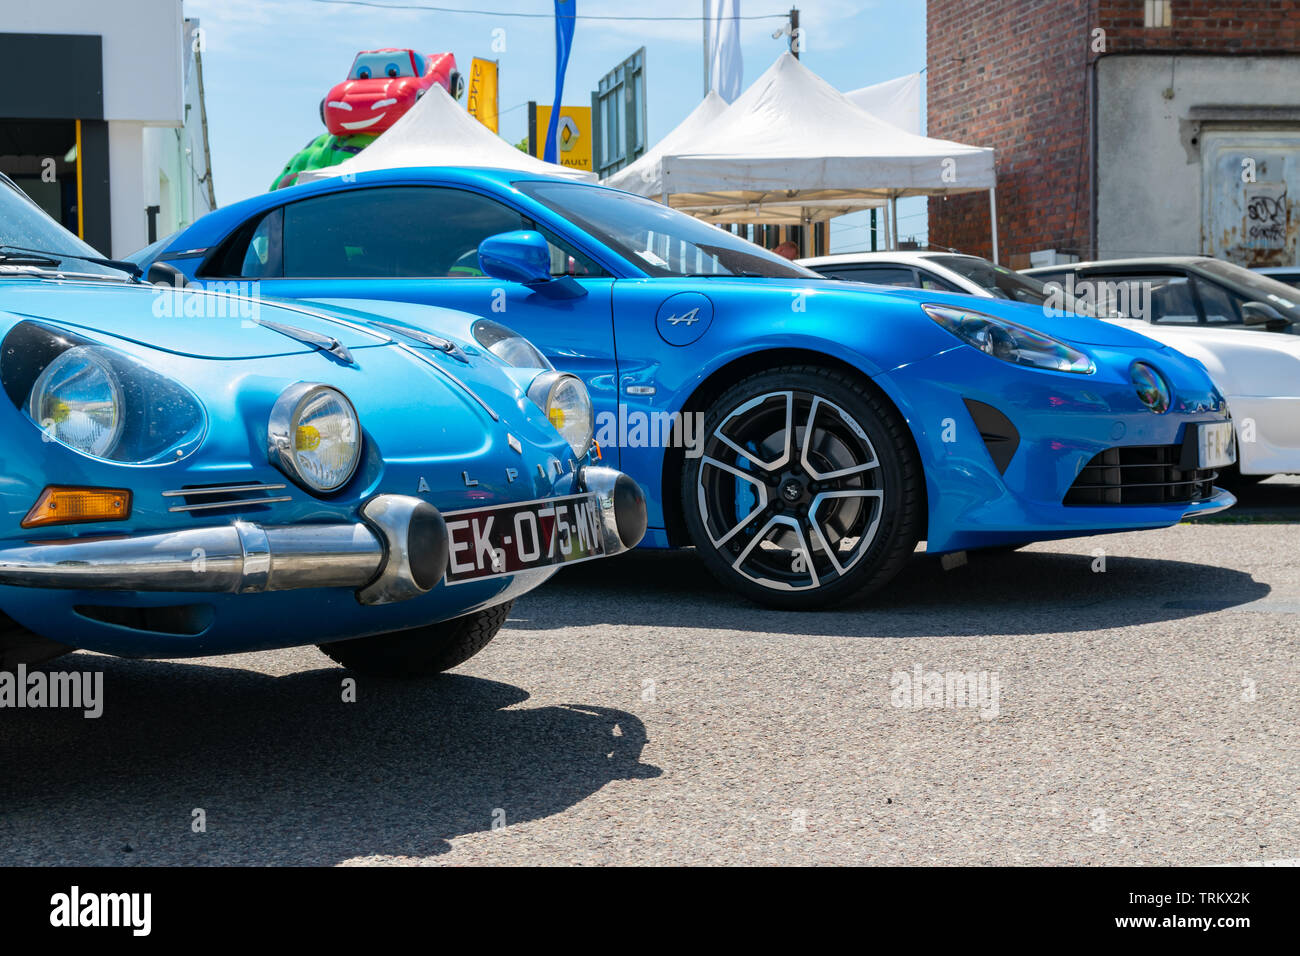 Wattrelos,FRANCE-June 02,2019: blue new and old Renault Alpine A110,car exhibited at the Renault Wattrelos Martinoire parking lot. Stock Photo